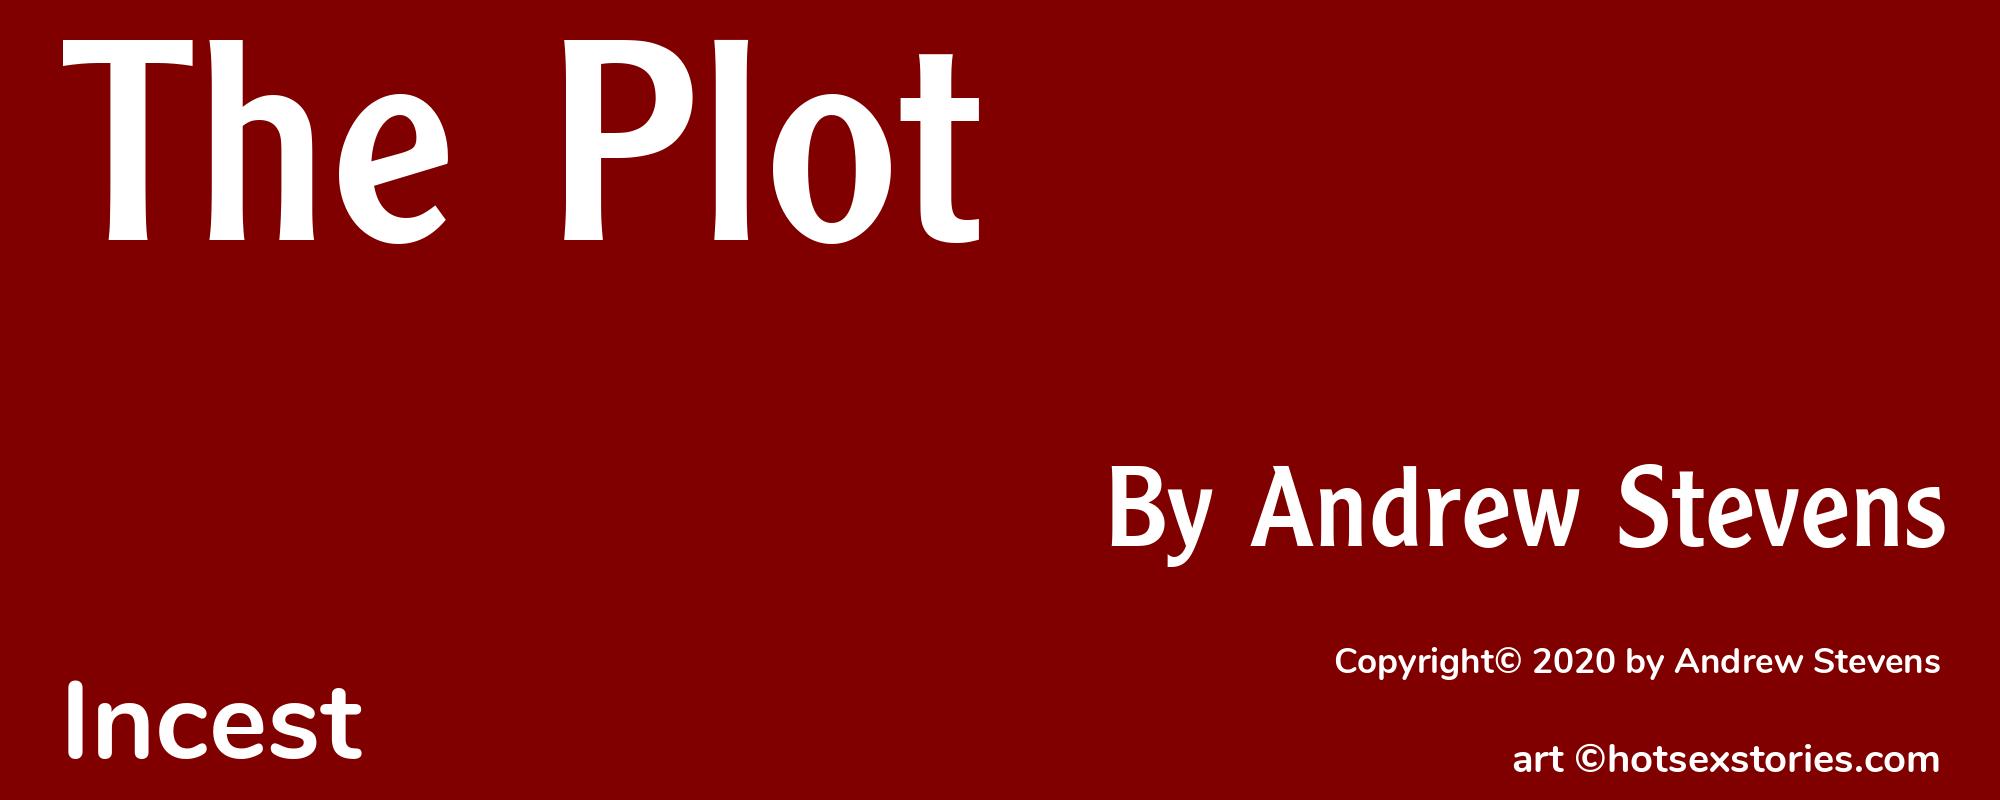 The Plot - Cover